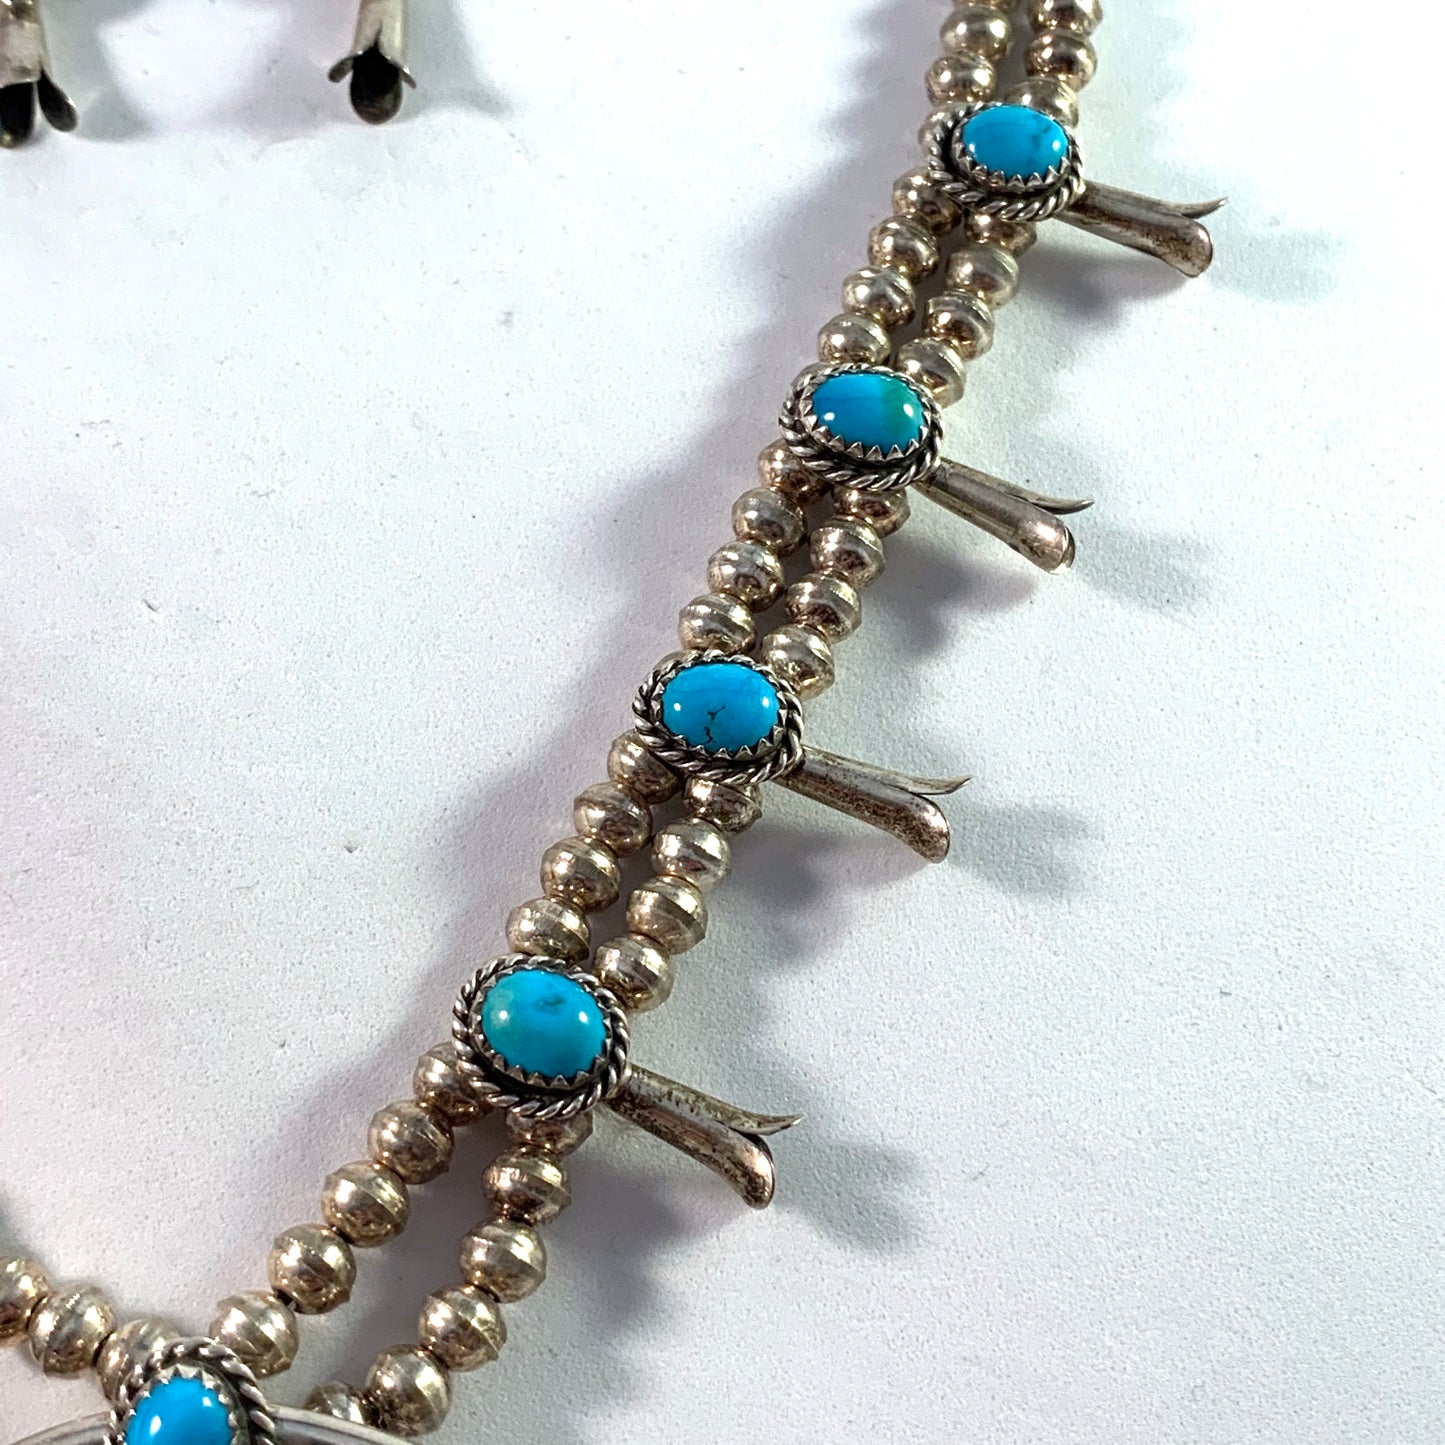 Signed Vintage Navajo Native American Sterling Silver Blue Turquoise Squash Blossom Necklace and Earrings.